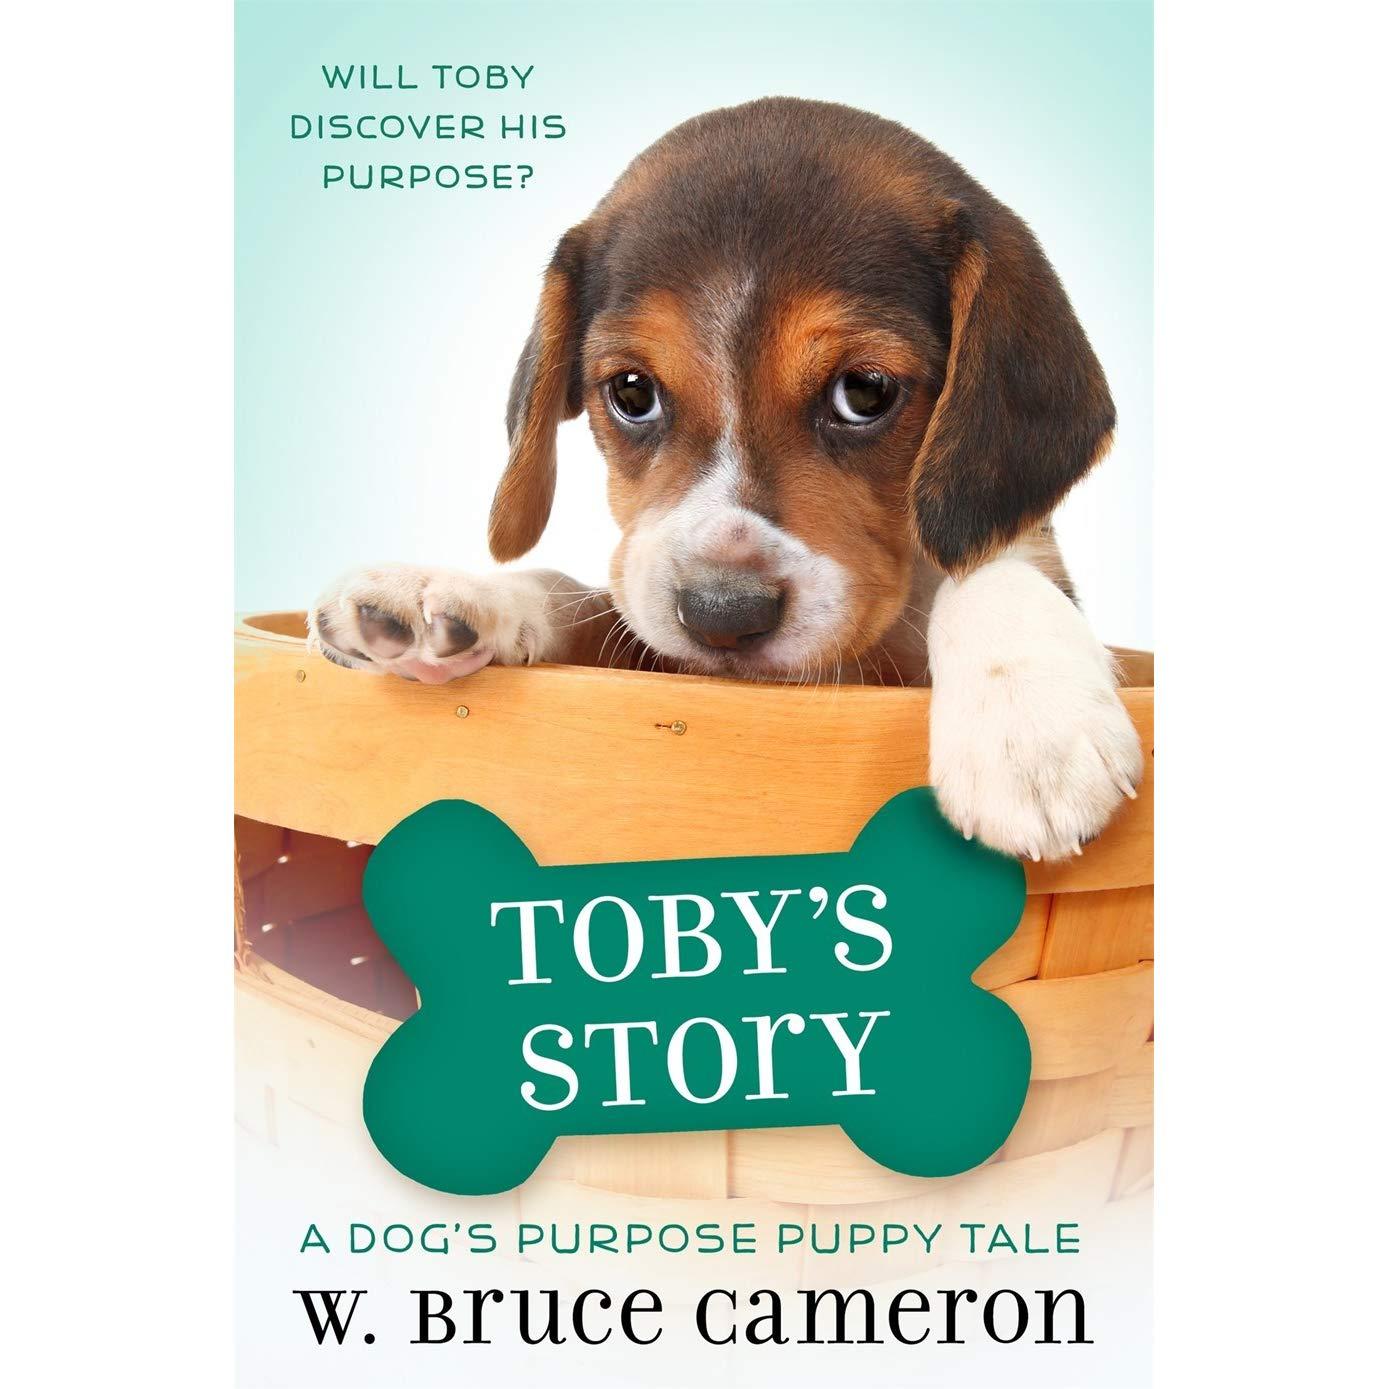 Ms. Yingling's review of Toby's Story: A Dog's Purpose Puppy Tale